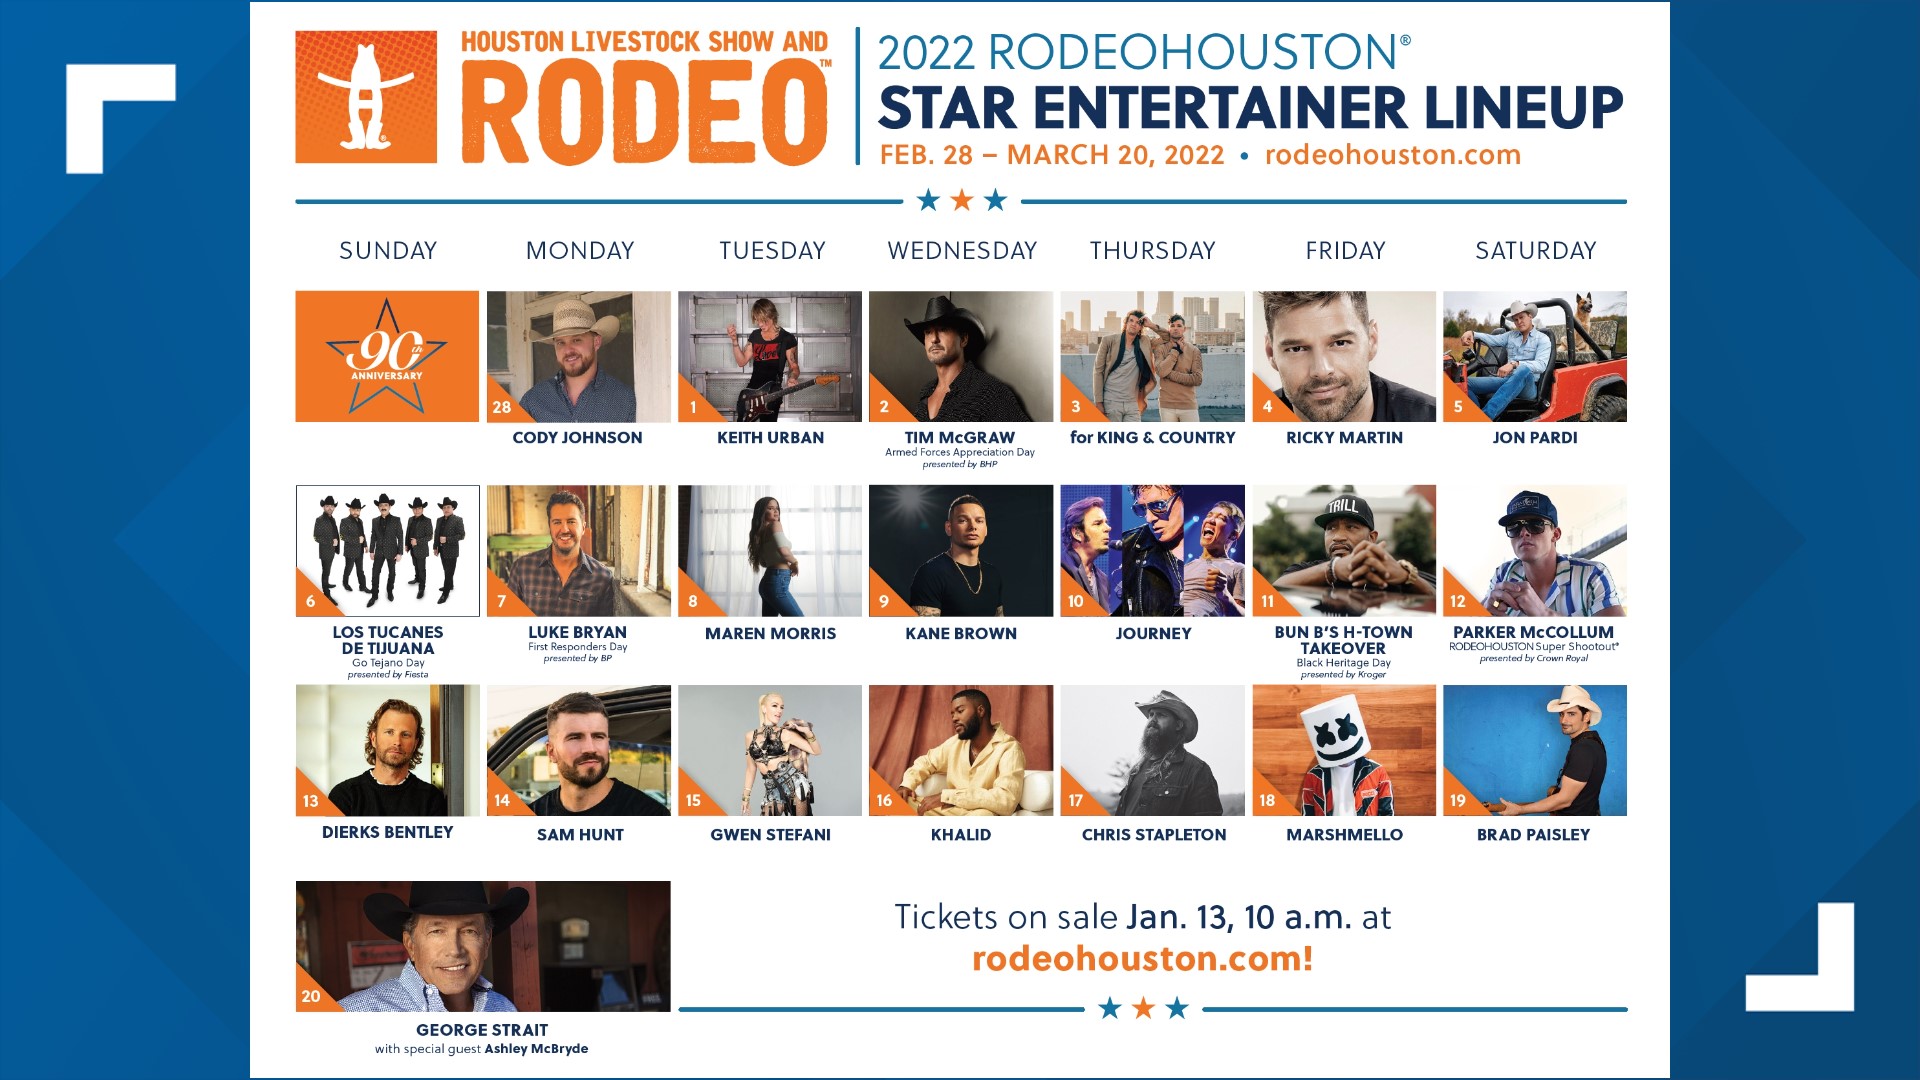 The Houston Livestock Show and Rodeo announced the full 2022 RodeoHouston entertainment lineup on Wednesday night.